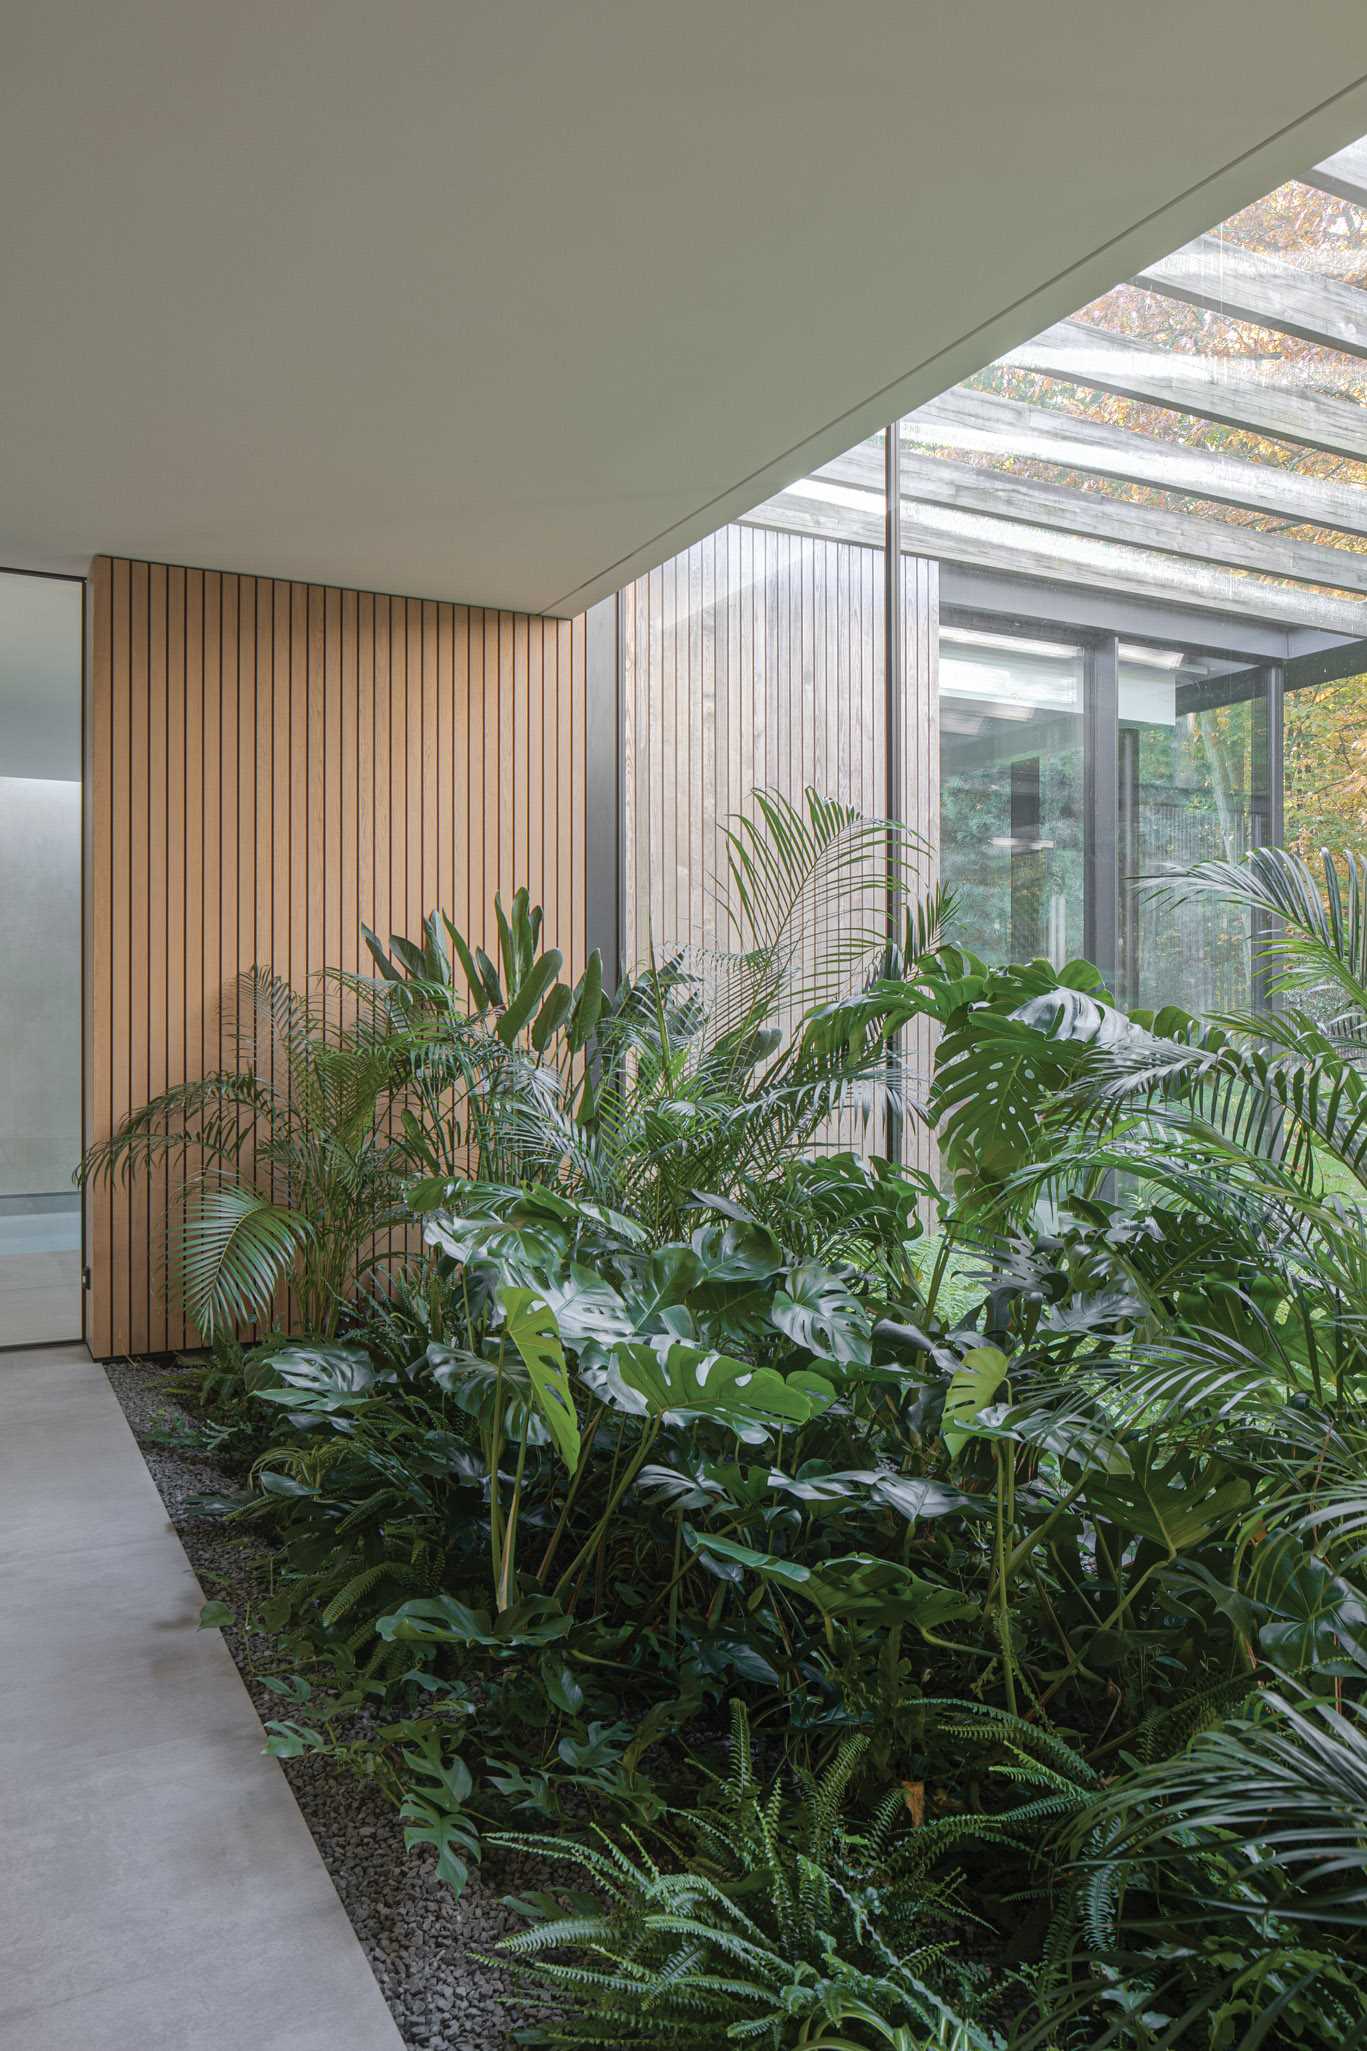 Small gardens penetrate the interior of this modern home, reaching into patios and semi-patios, appearing behind glass walls in the hall, living room, and bathroom. 